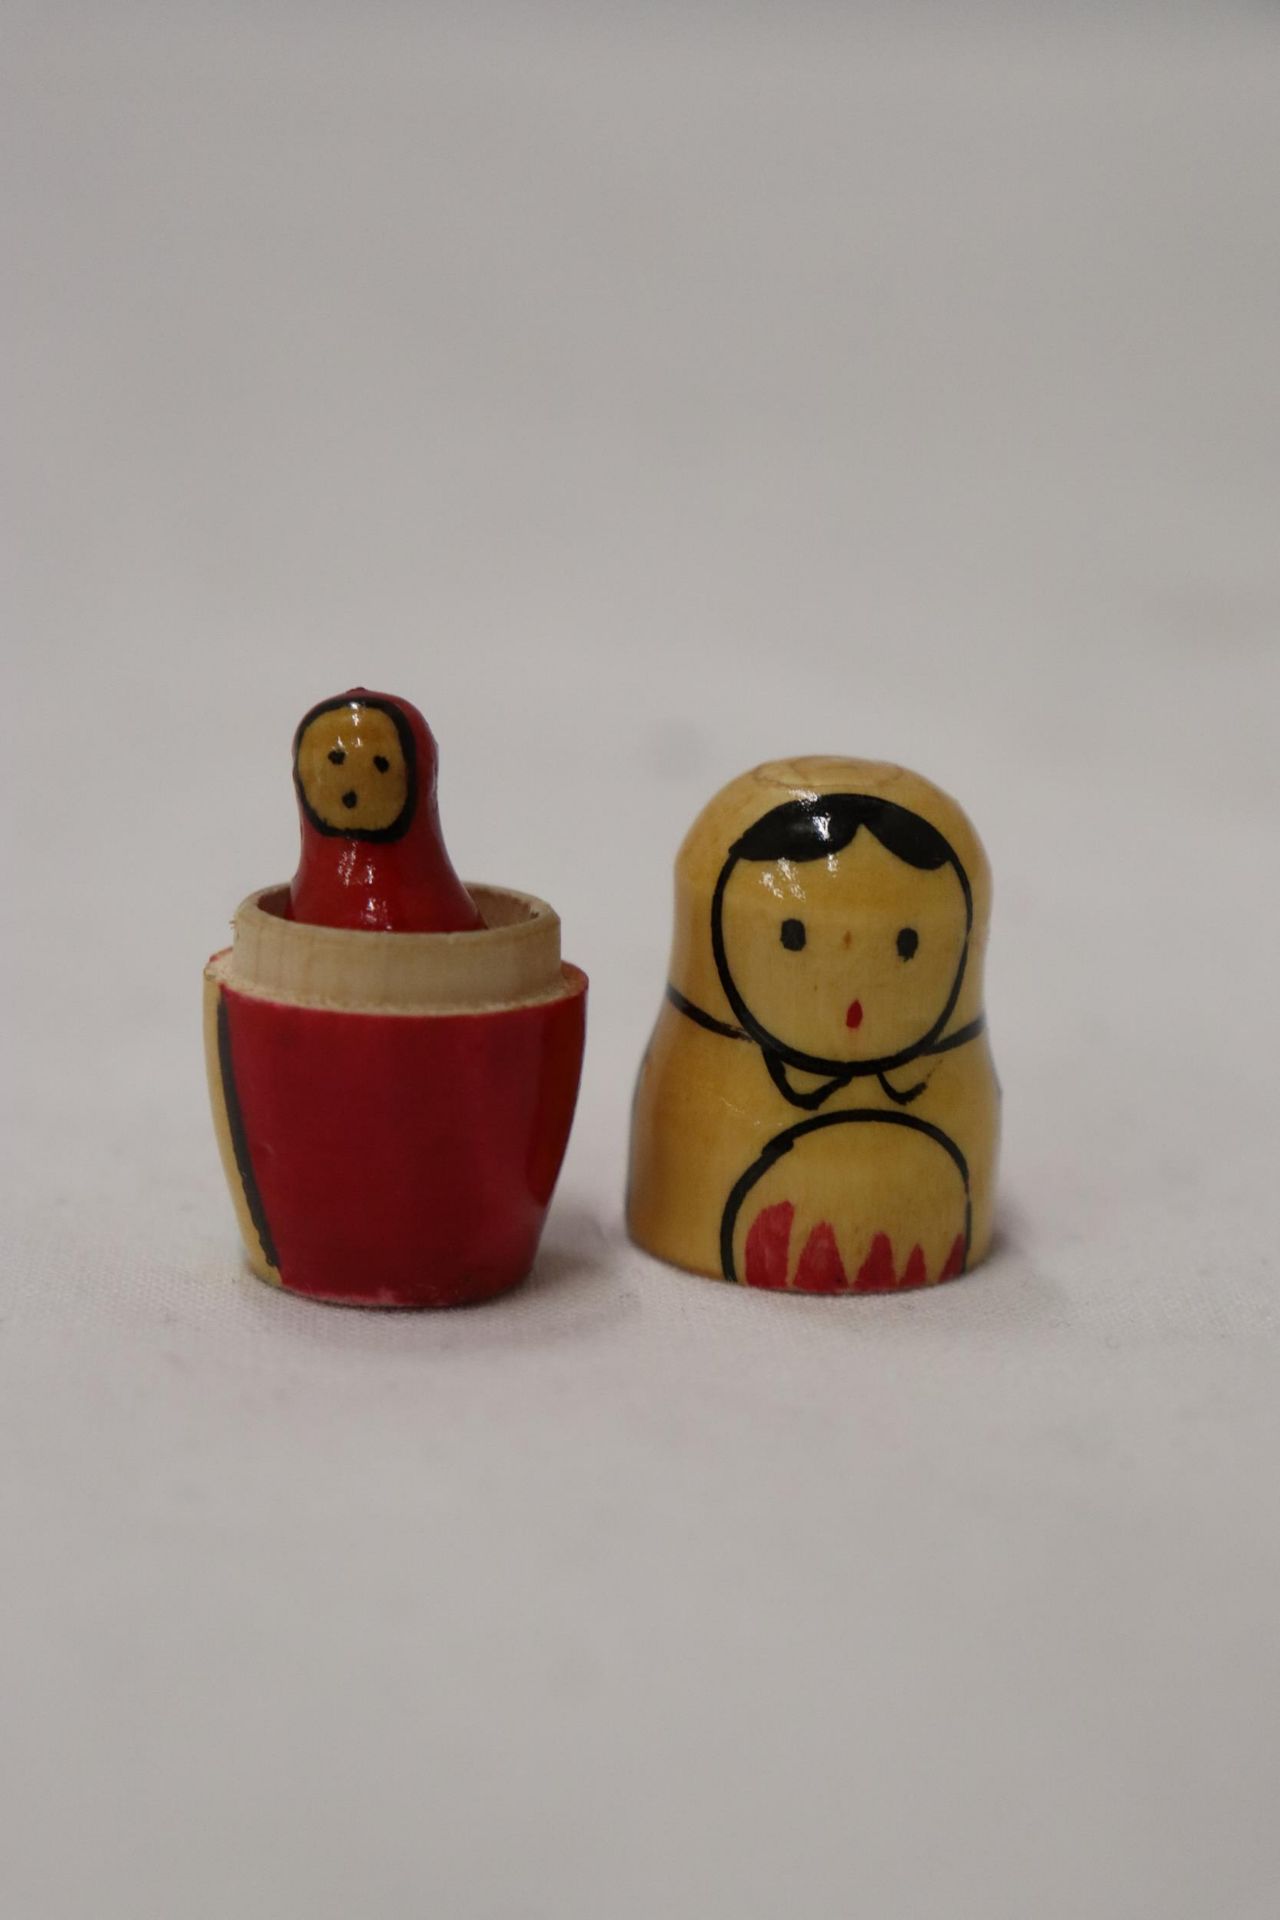 A LARGE RUSSIAN NESTING DOLL - Image 7 of 7